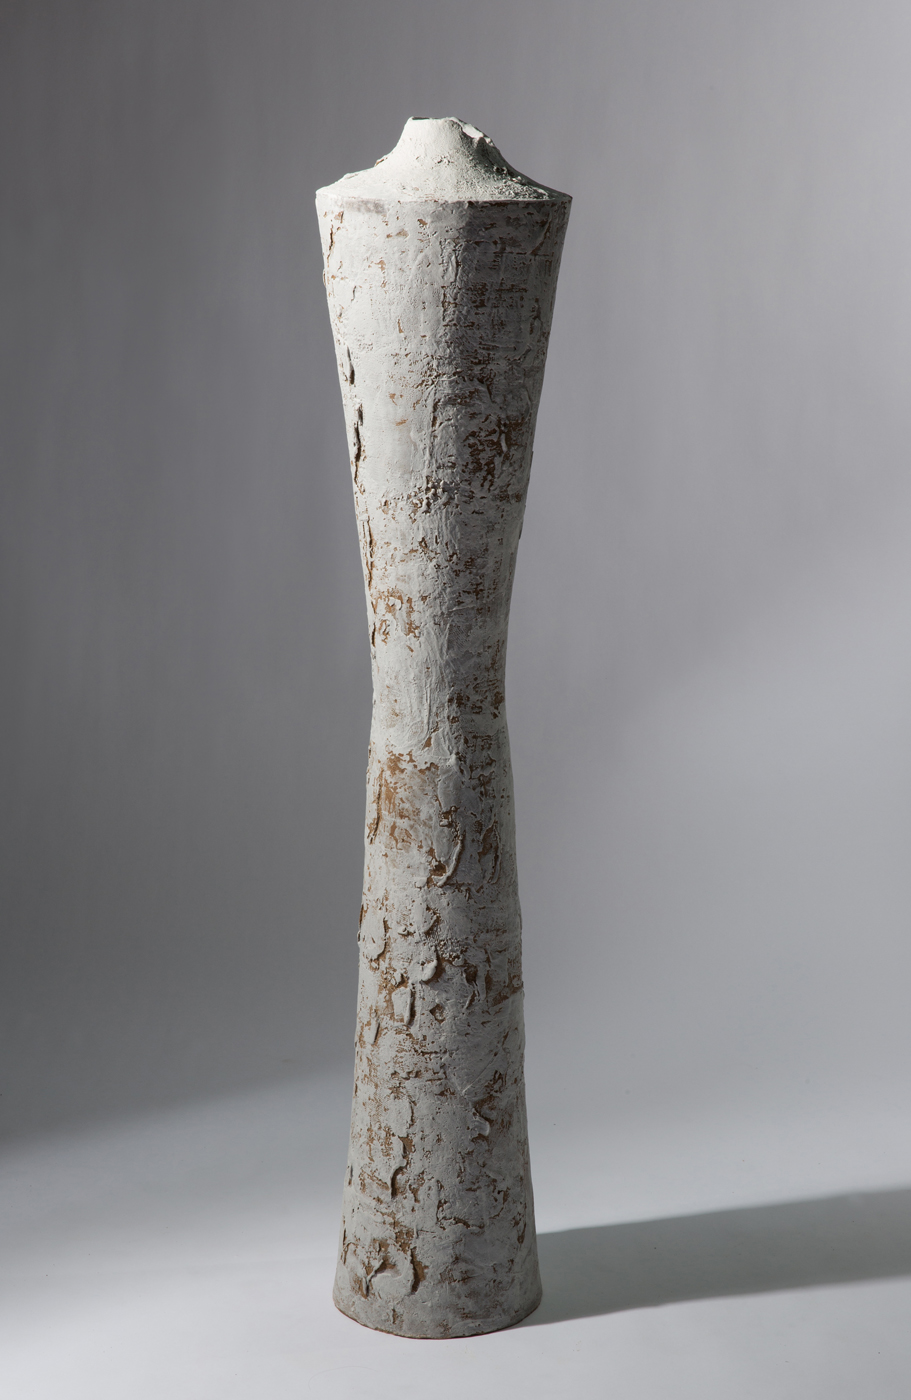 UNTITLED (TR440), 2013, stoneware and slip, 44 1/2 in H; private collection